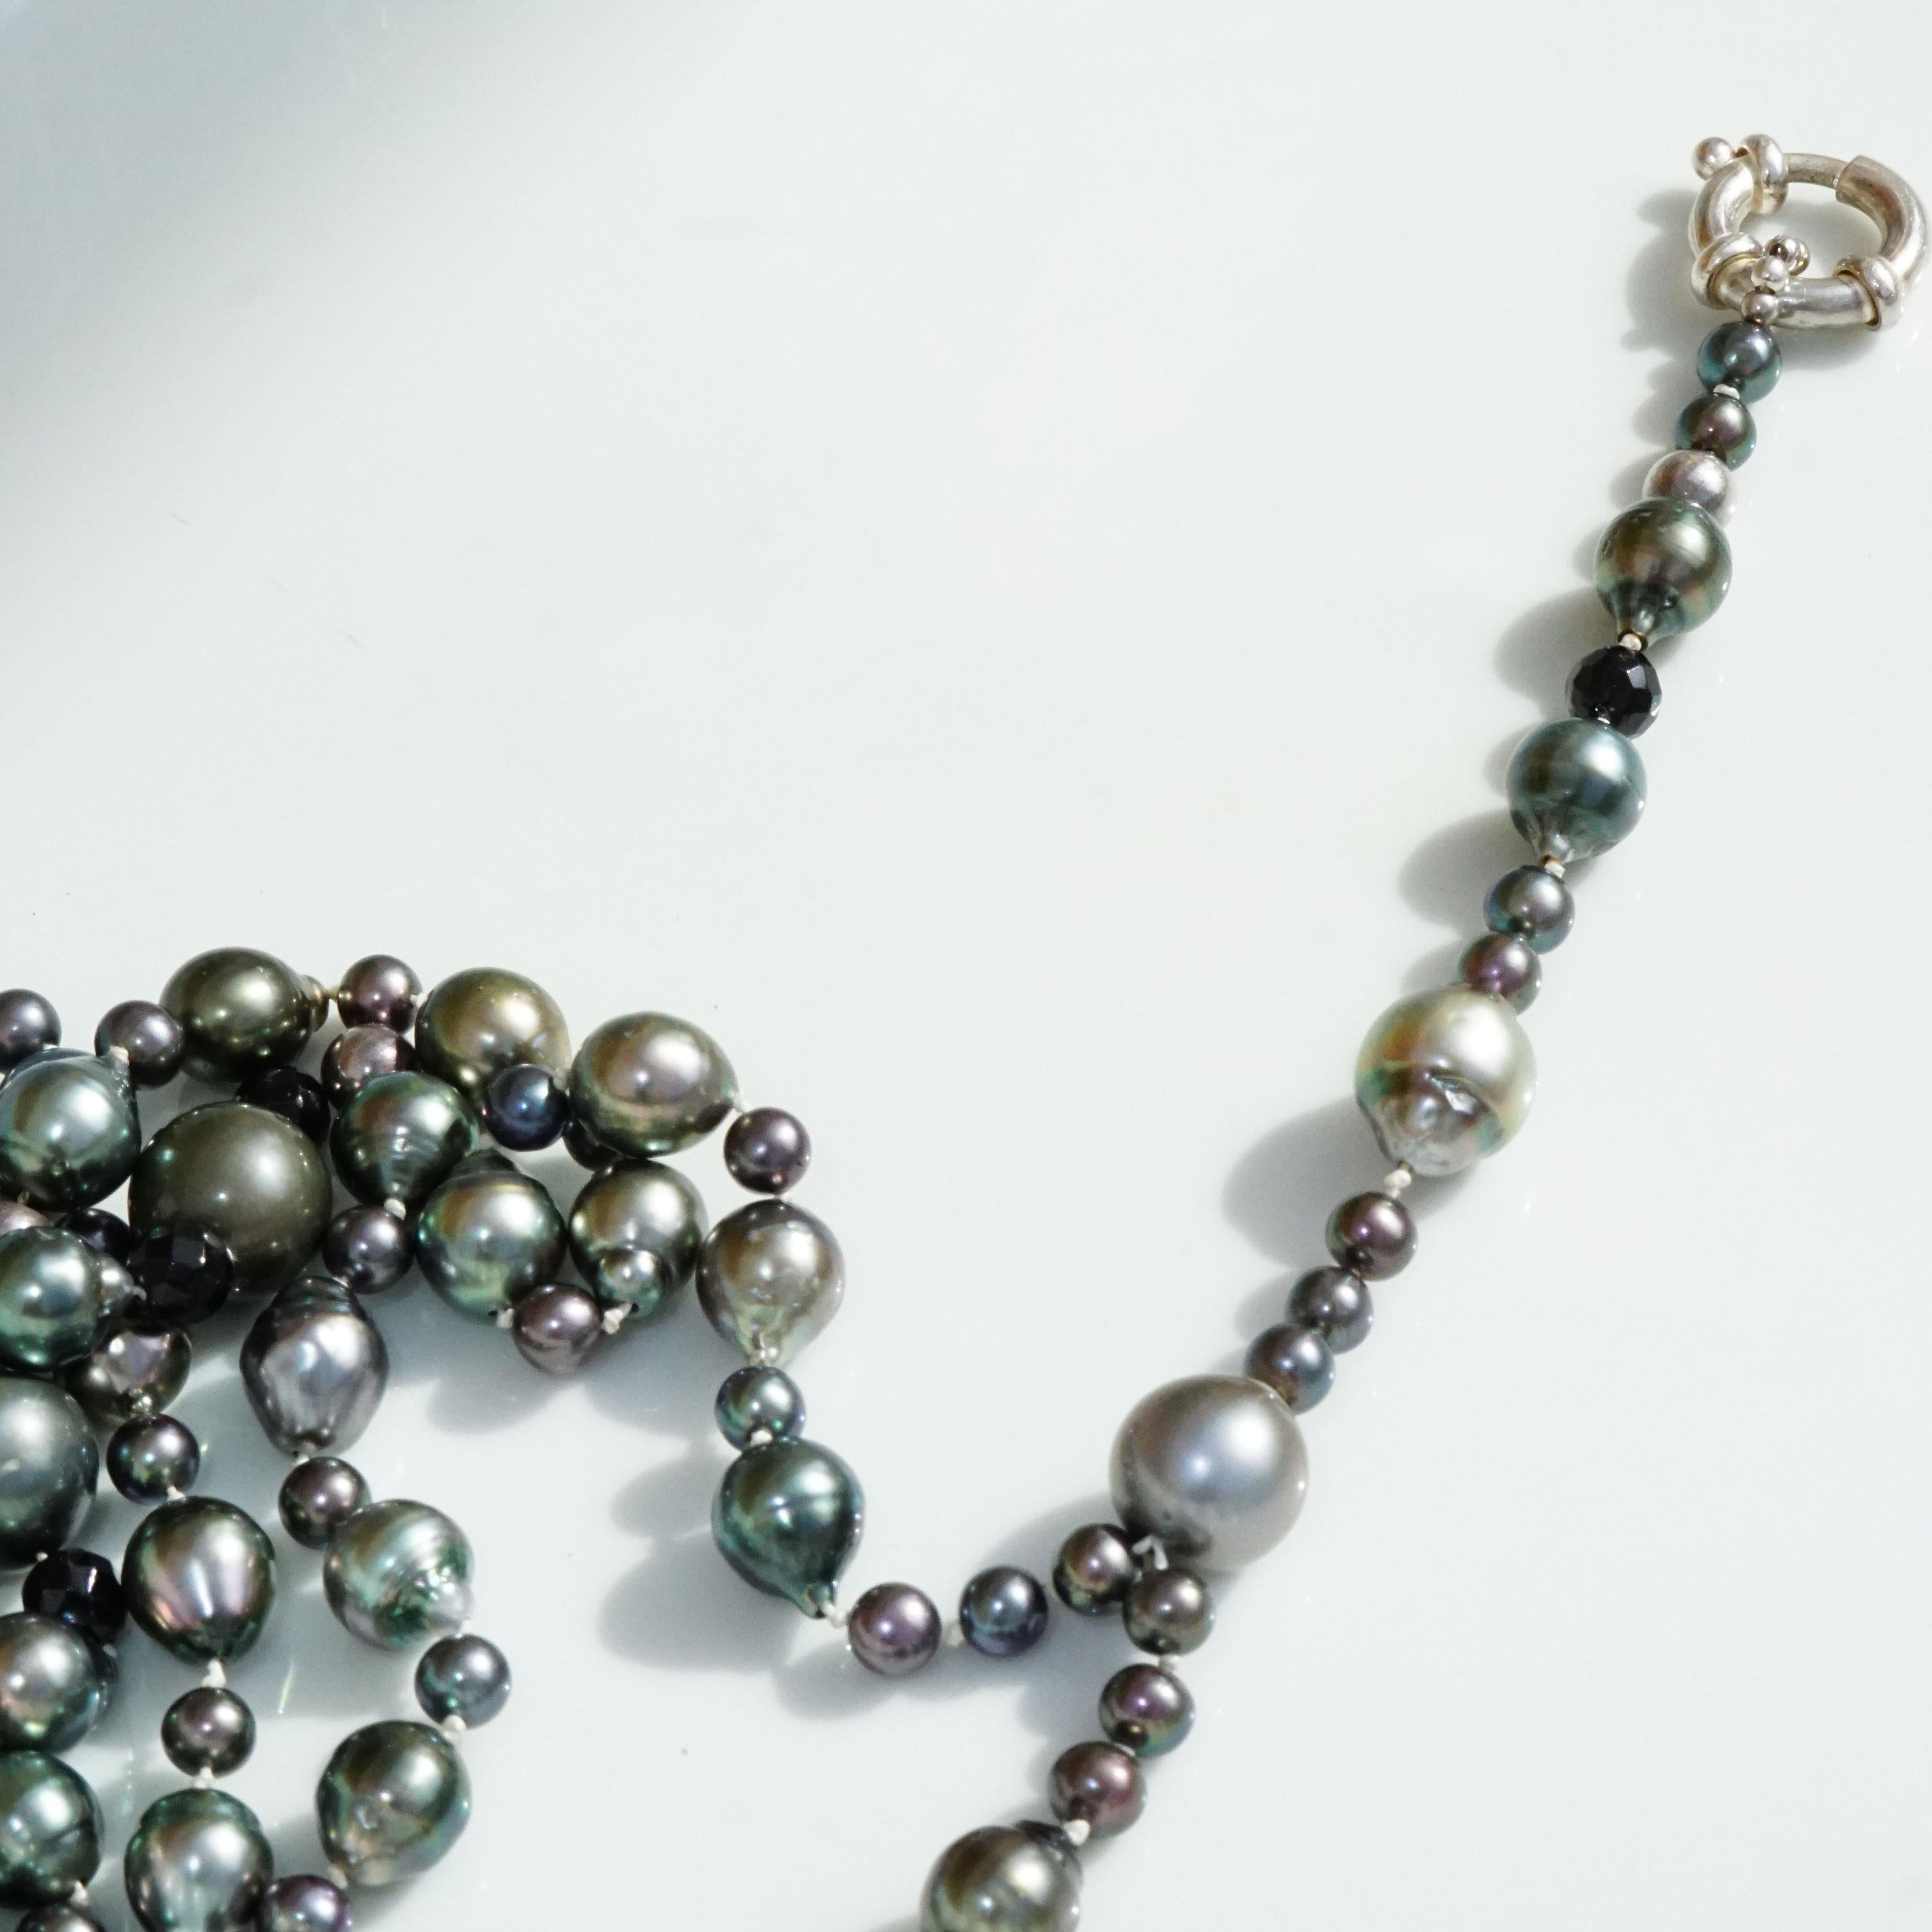 Phenomenal chain (rosary or y-style) to wear long with pendant possible, with 925 sterling silver spring ring, with drop-shaped Tahitian cultured pearls, small black cultured pearls, 925 silver balls, faceted onyx balls, approx. 84 cm long plus 12